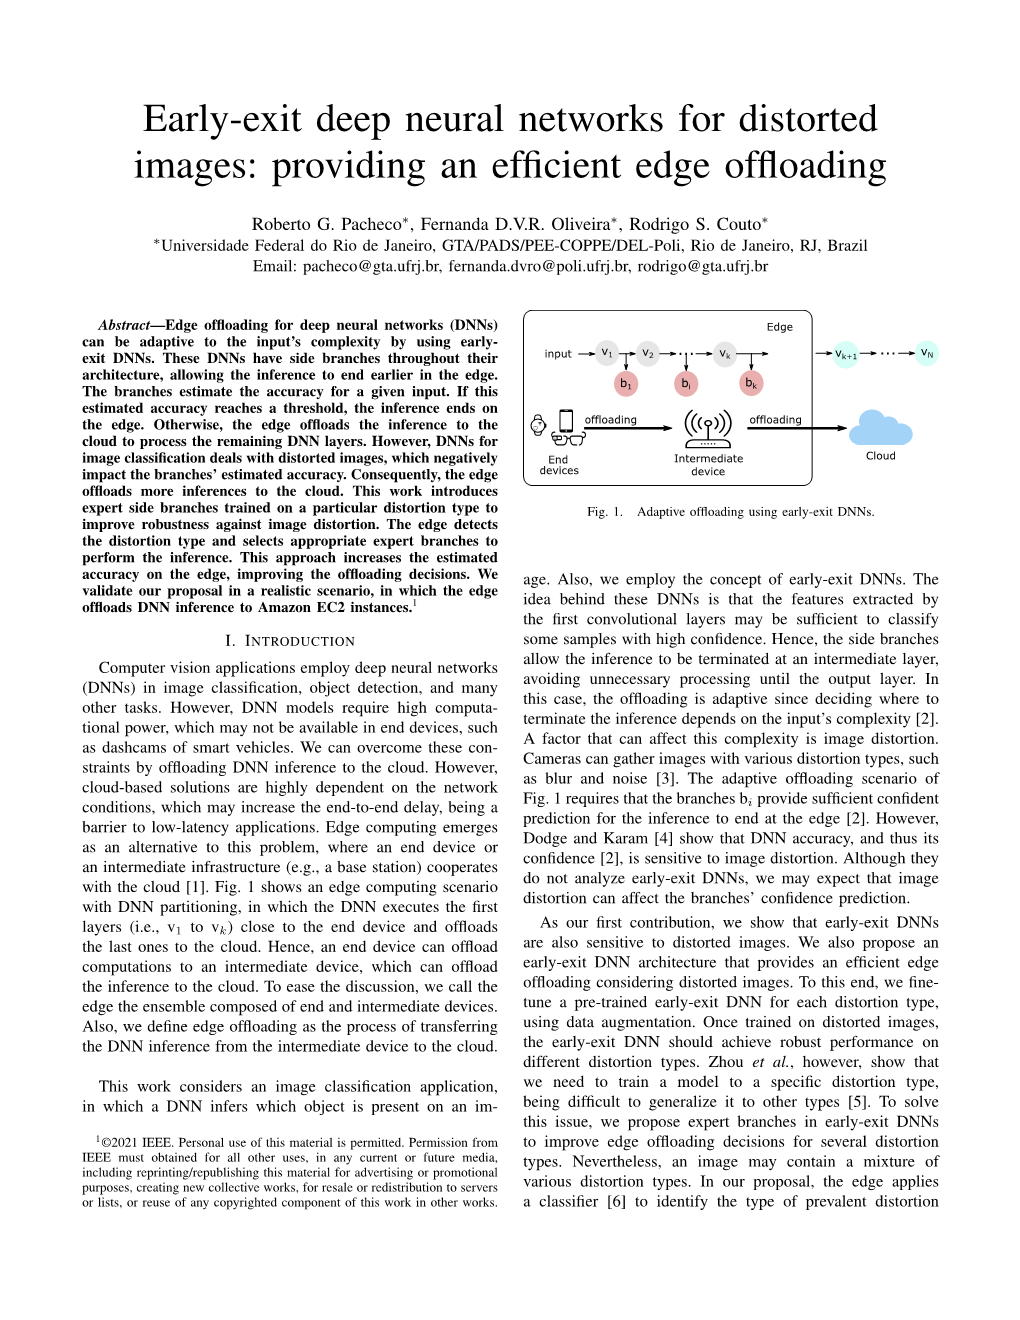 Early-Exit Deep Neural Networks for Distorted Images: Providing an Efﬁcient Edge Ofﬂoading